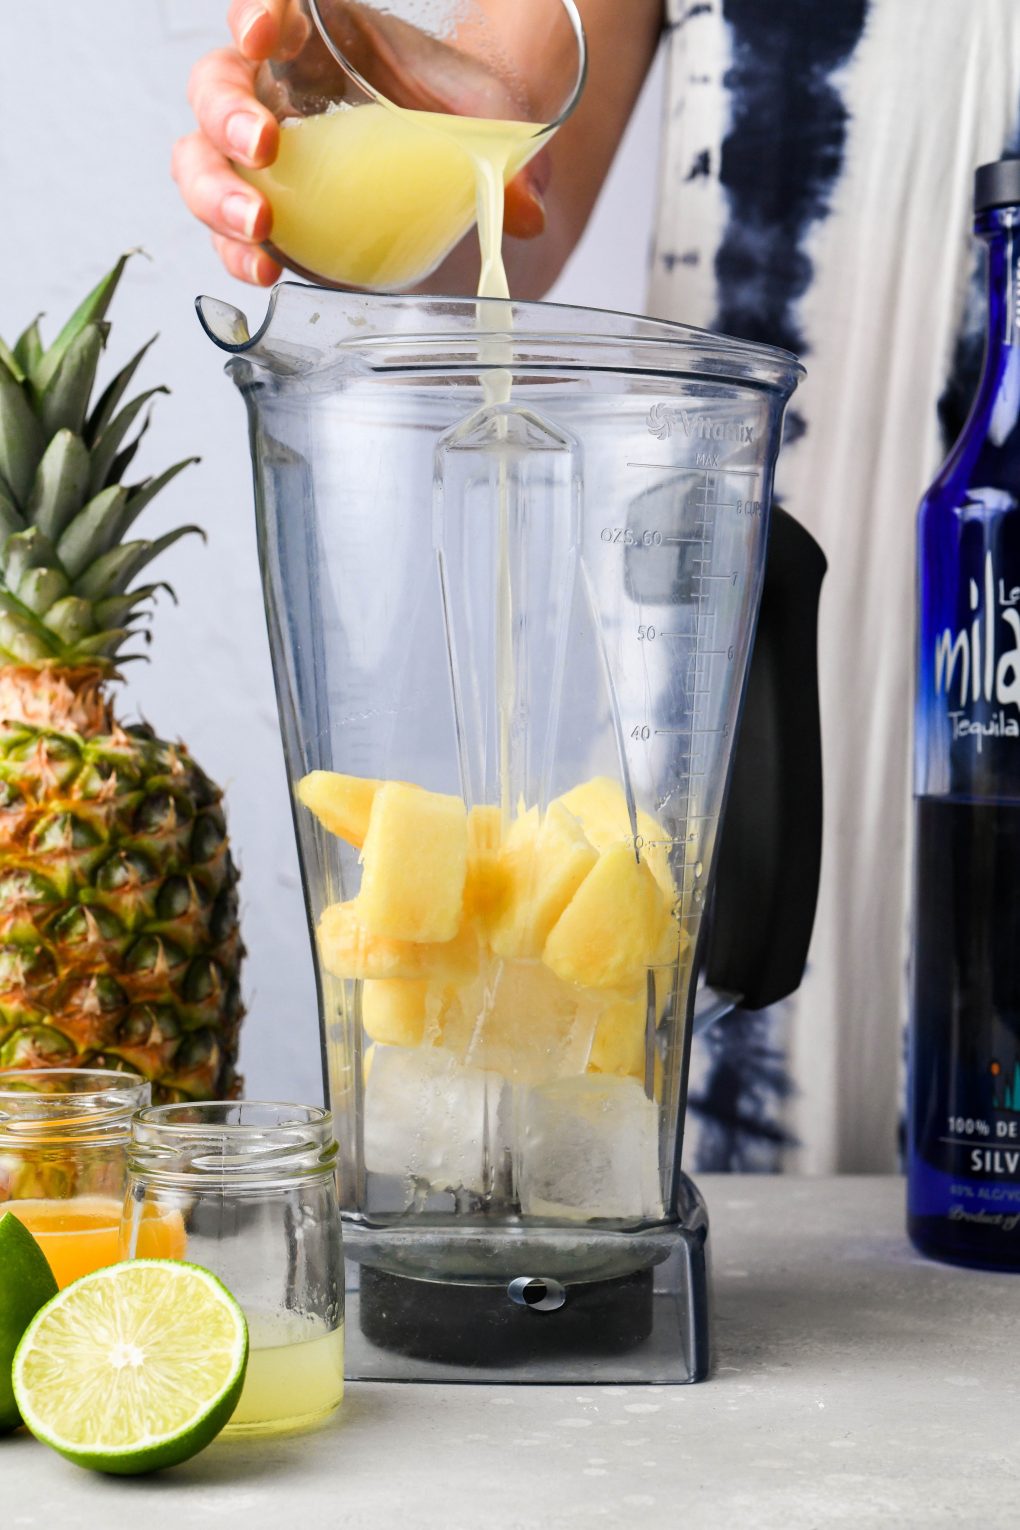 A hand pouring pineapple juice into a blender with frozen pineapple and ice. On a light background next to a fresh pineapple and a bottle of tequila.